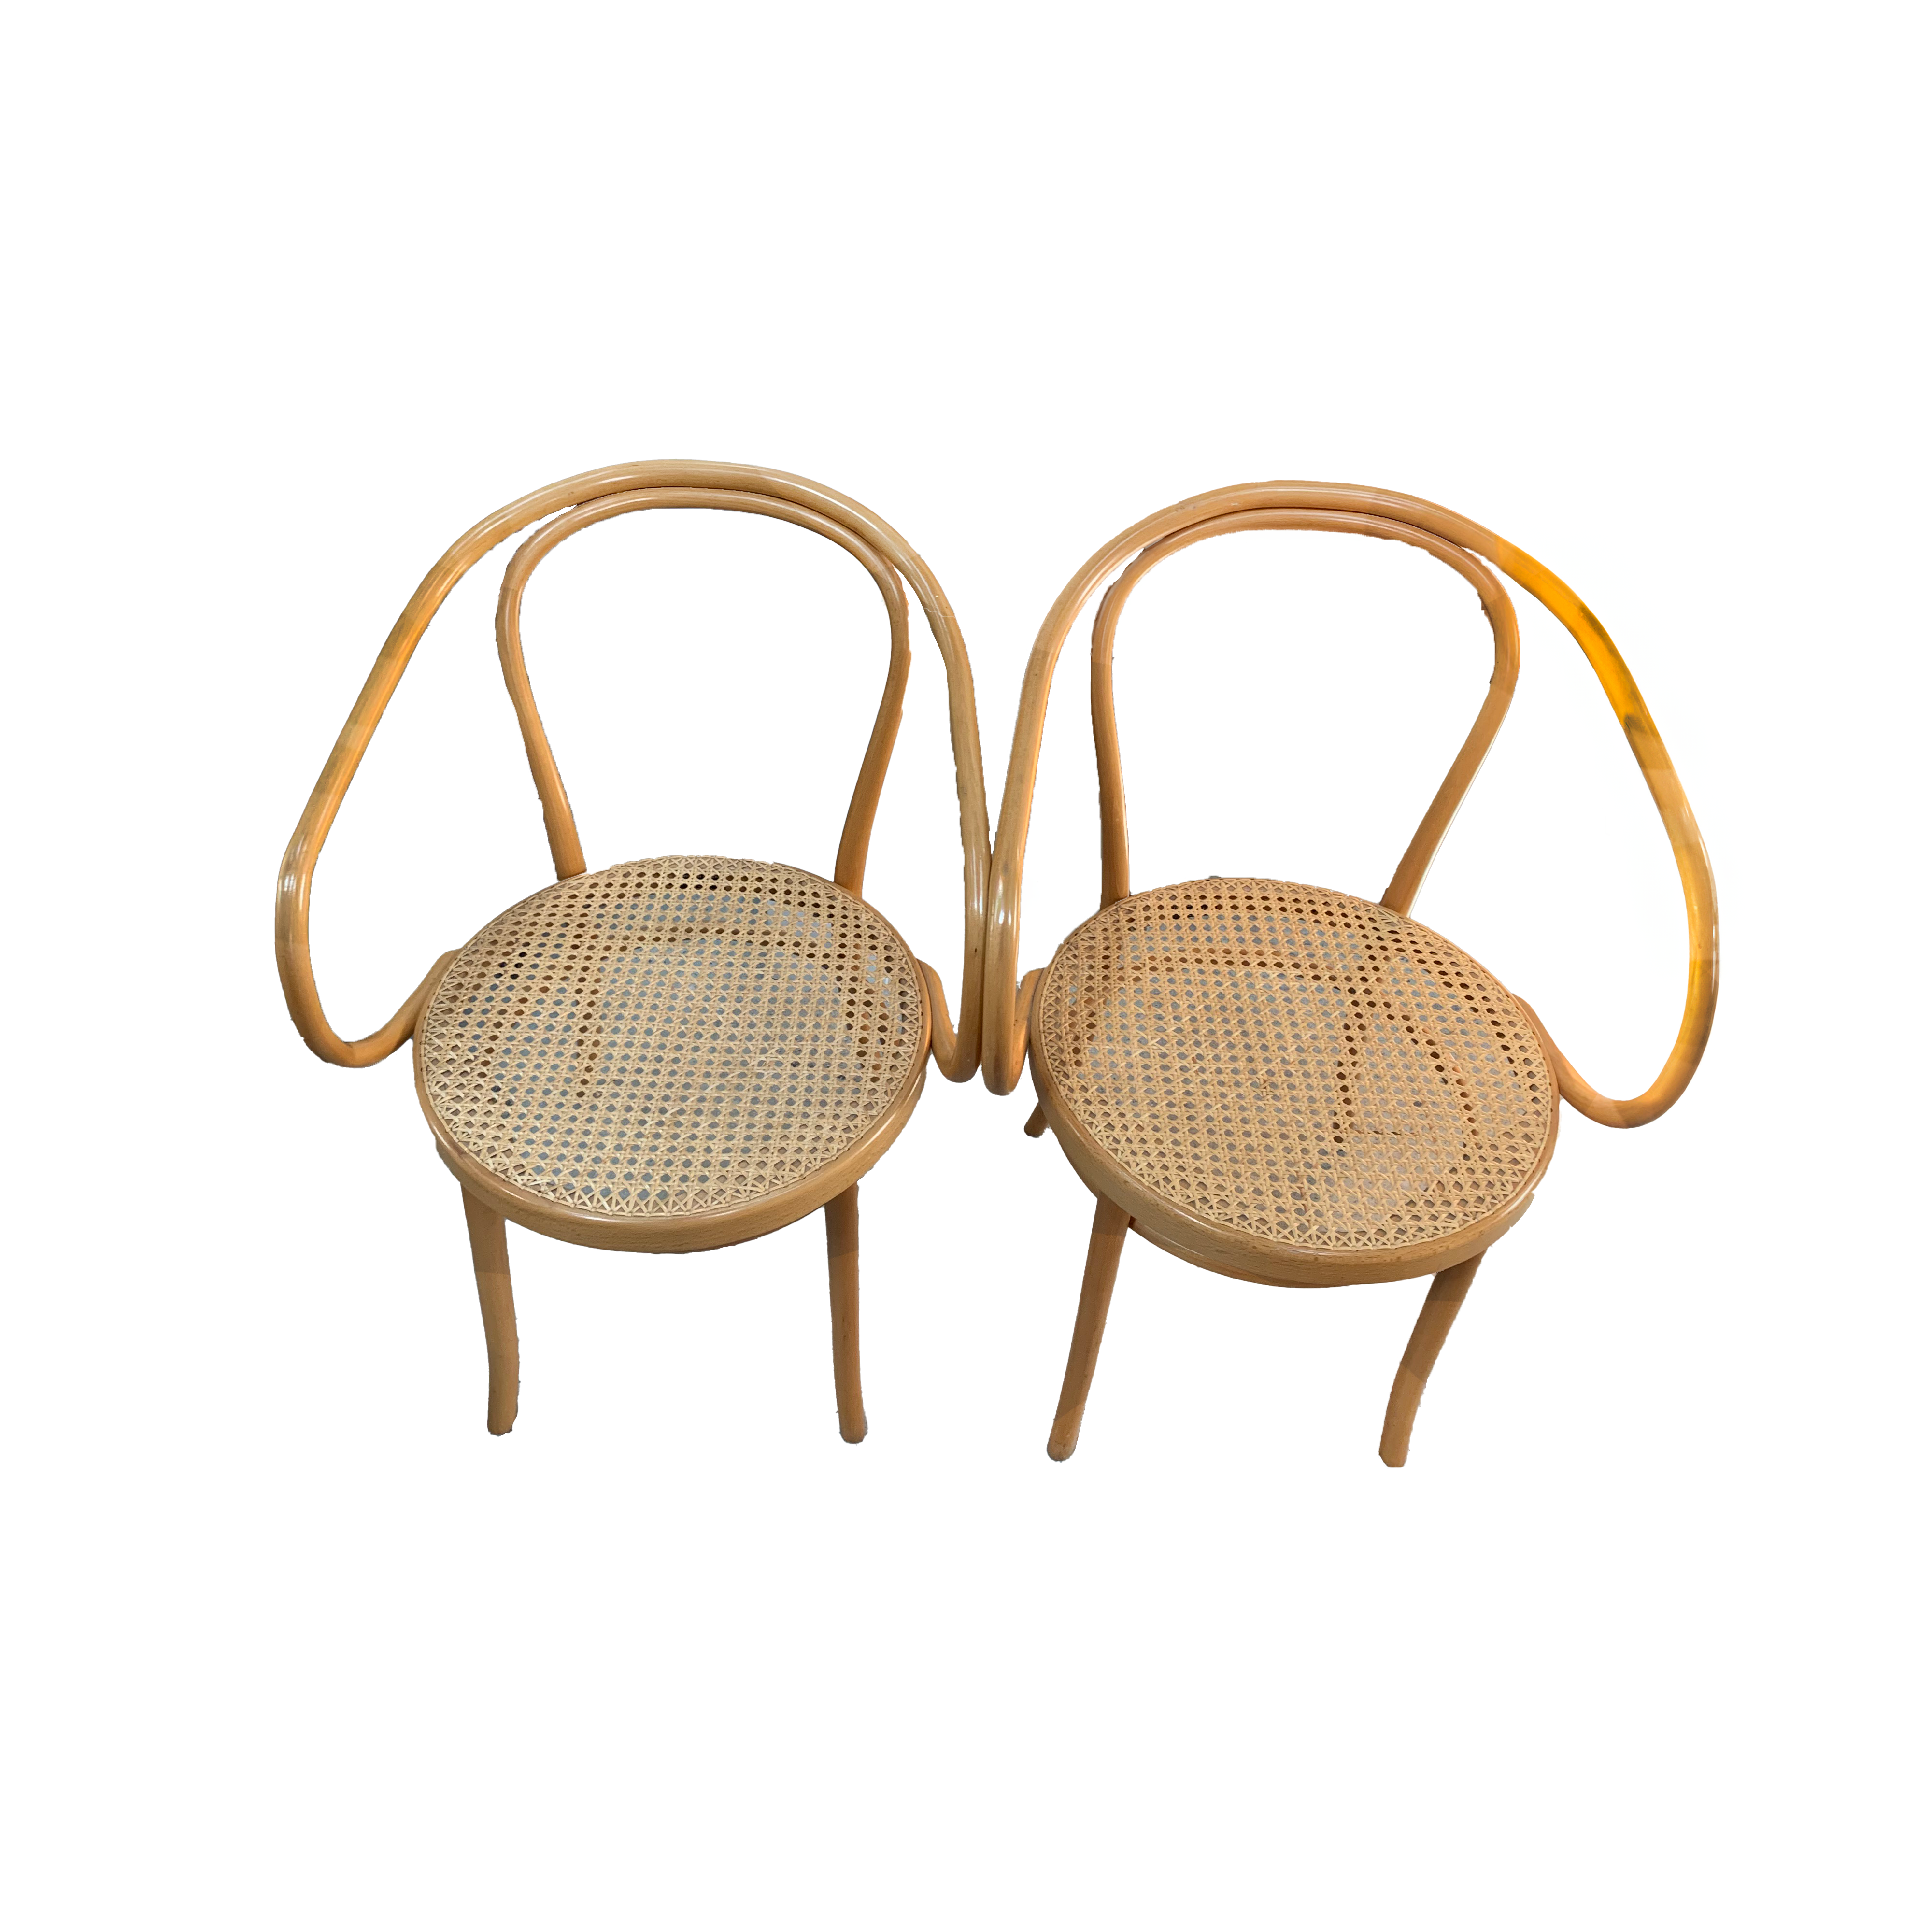 Bent Wood Cane Arm Chairs - Pair